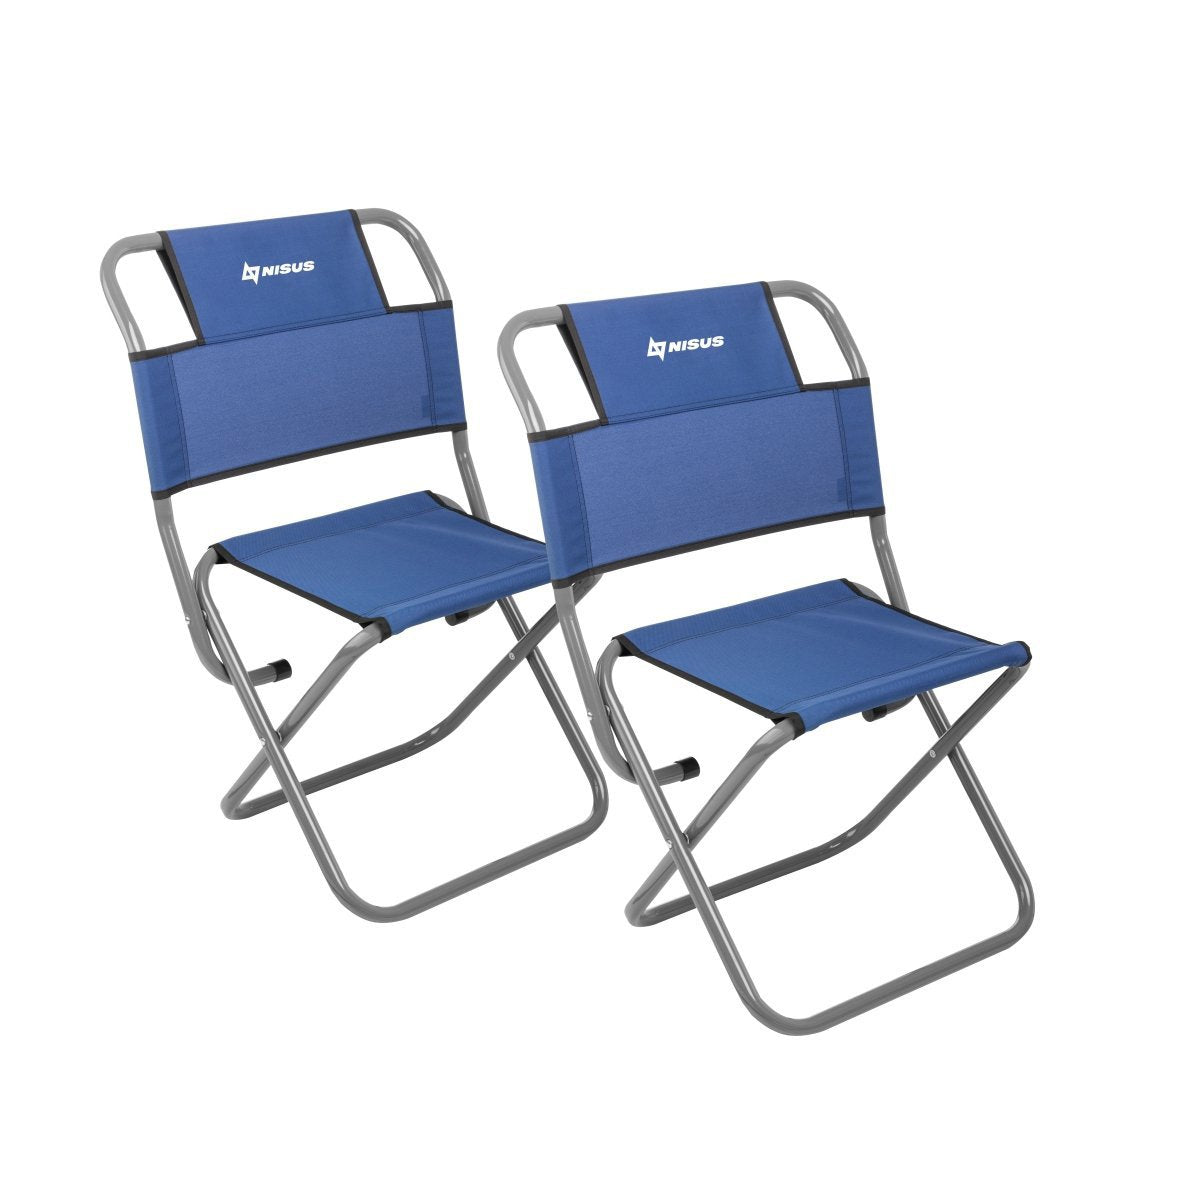 Set of Two Outdoor Portable Folding Tourist Chairs